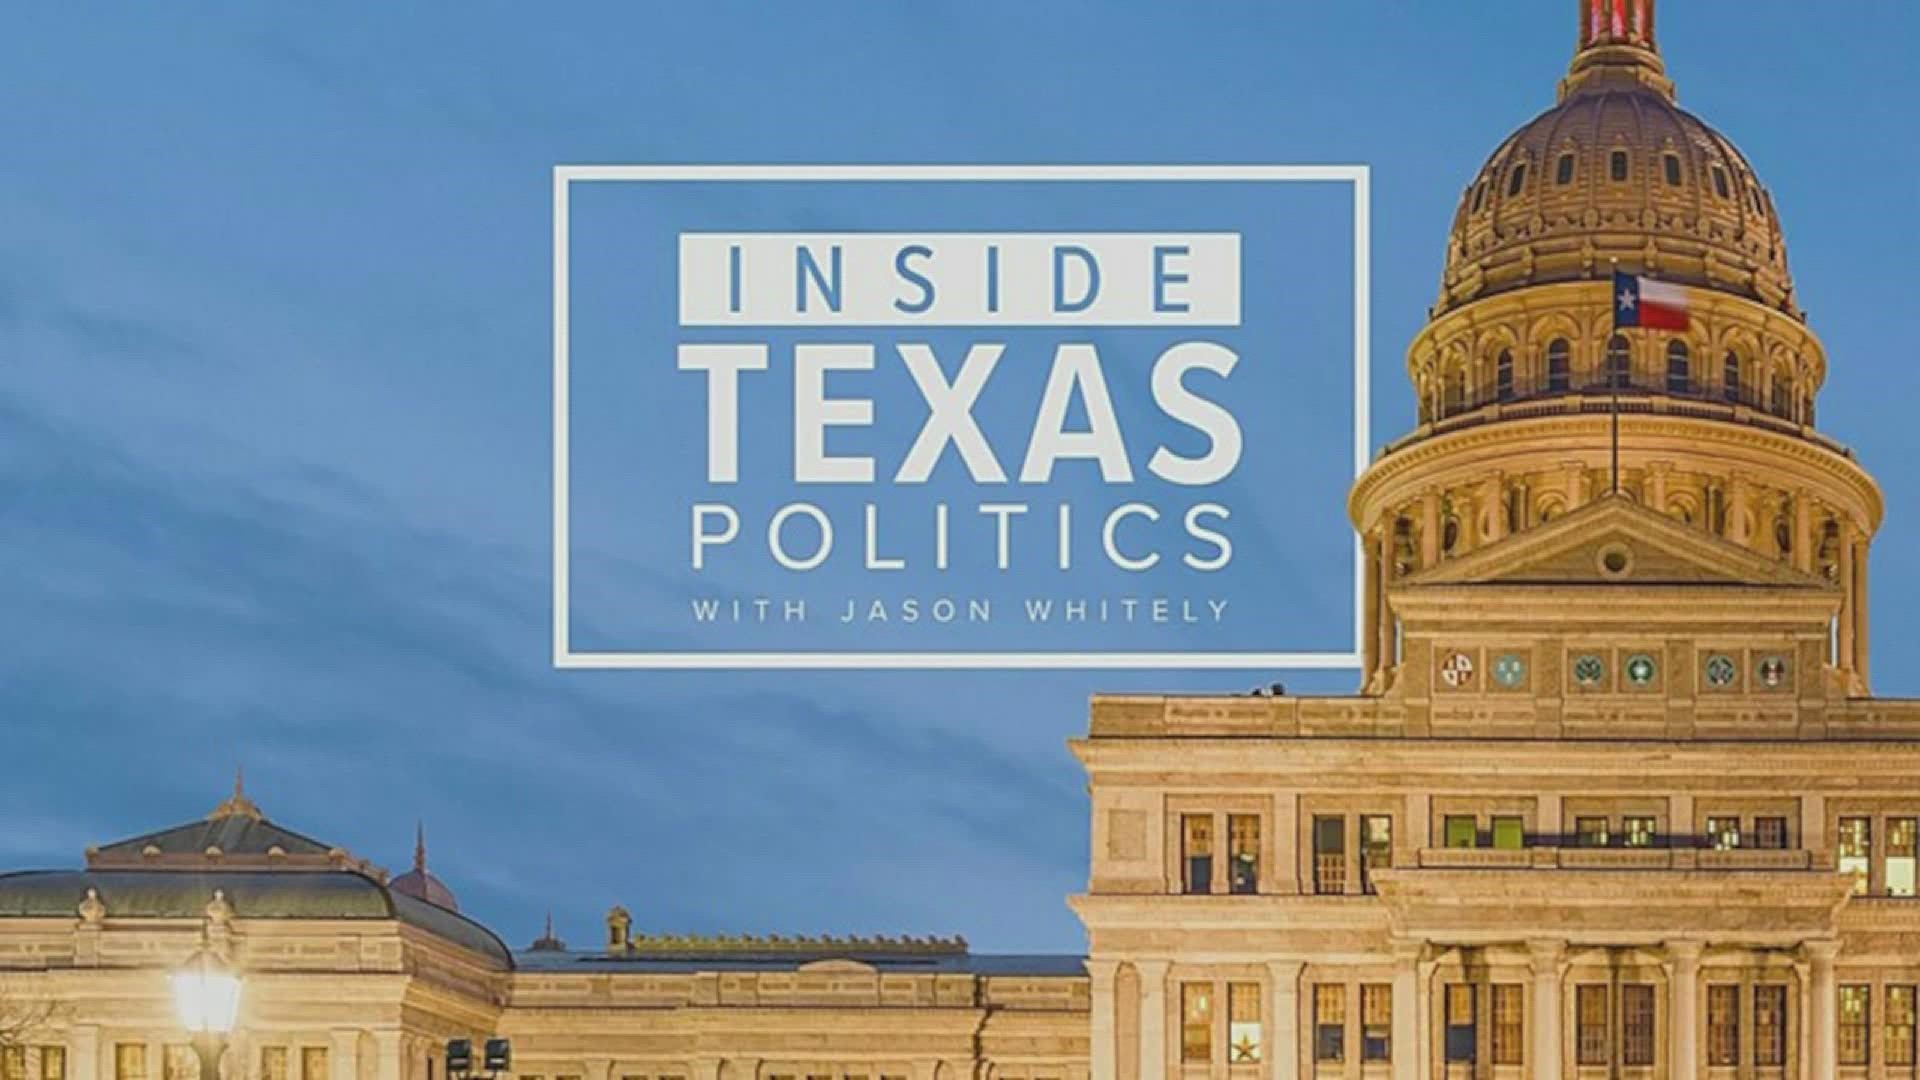 Patrick sits down with ITP's Jason Whitely discuss saving Texans money, parental freedom and throwing criminals who use guns behind bars for 10 years (minimum).